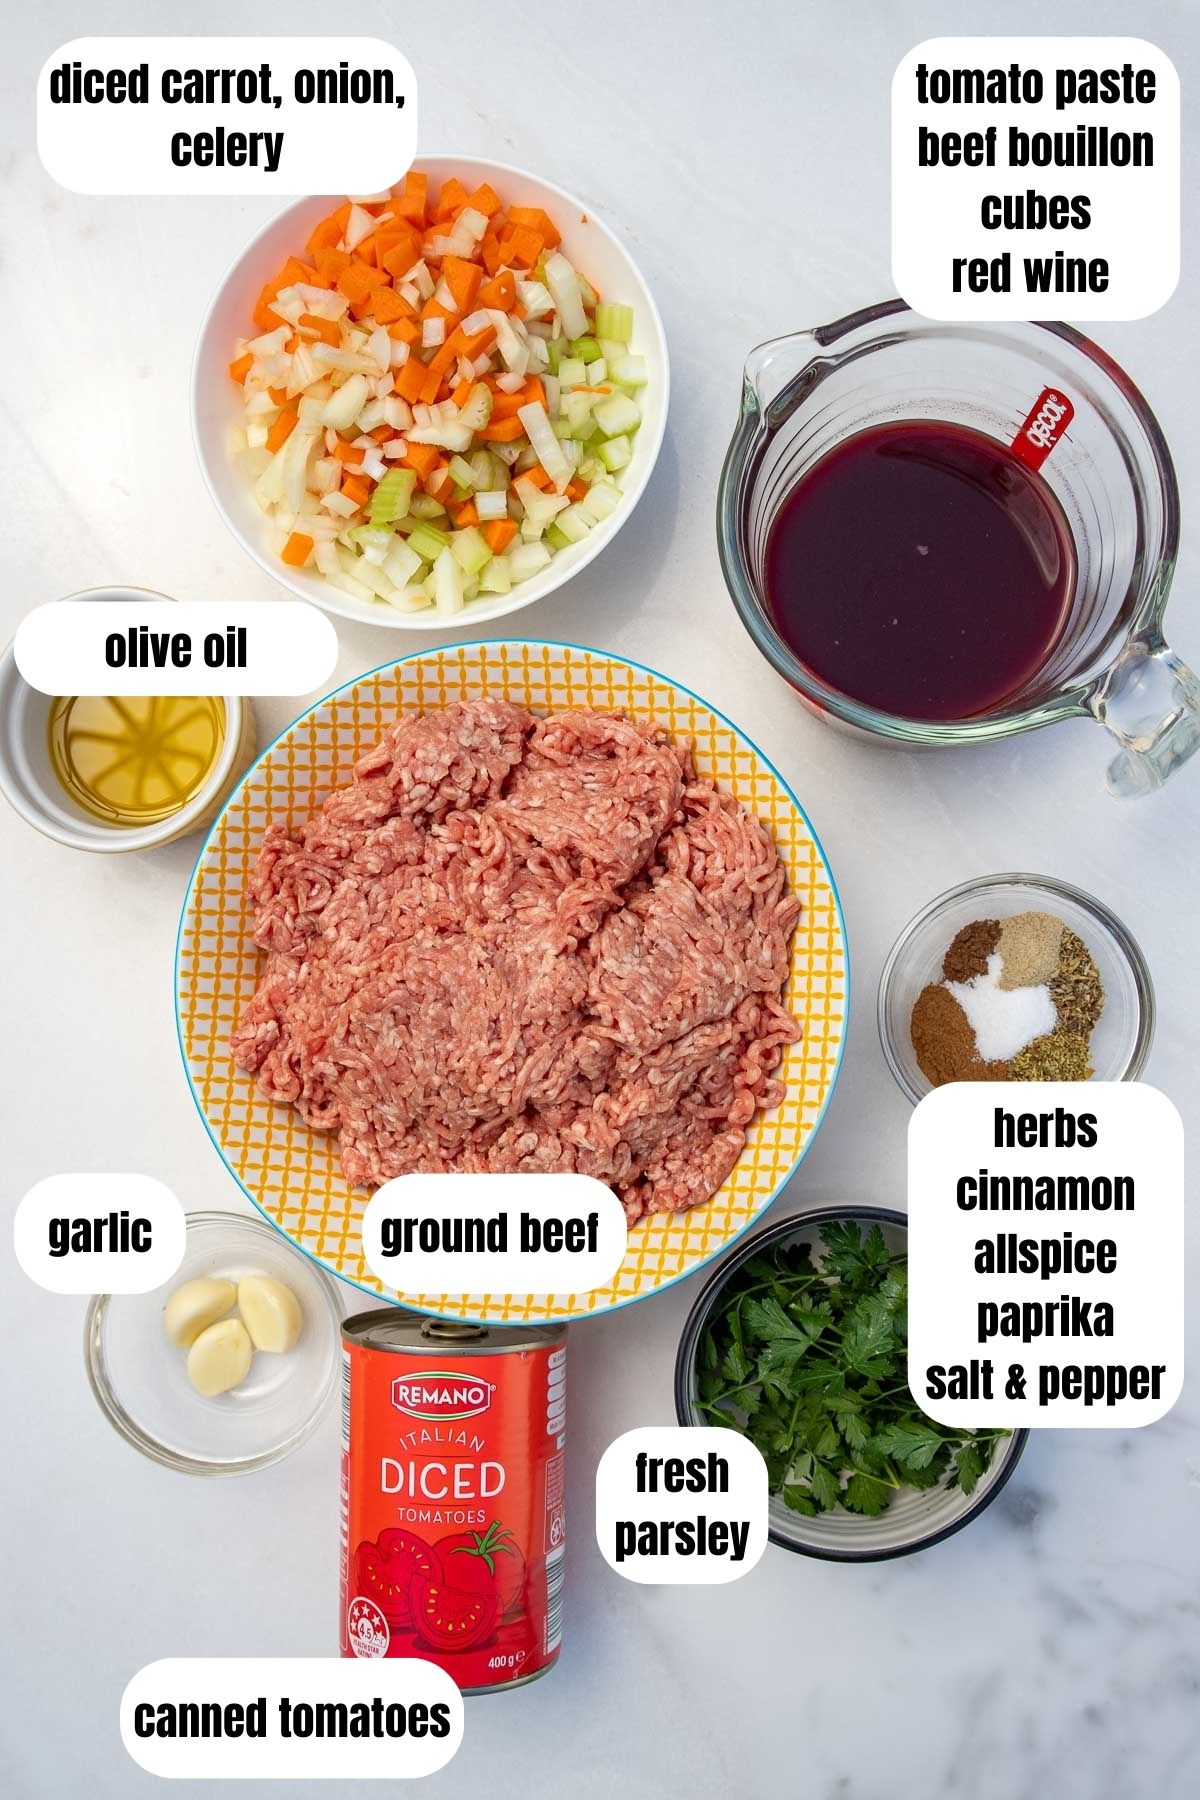 Overhead on marble background of all ingredients for a Greek ragu sauce for pastitsio including ground beef, garlic, herbs and spices, canned, tomatoes, wine, tomato paste and beef bouillon cubes, fresh parsley, olive oil and diced carrot, celery and onion.